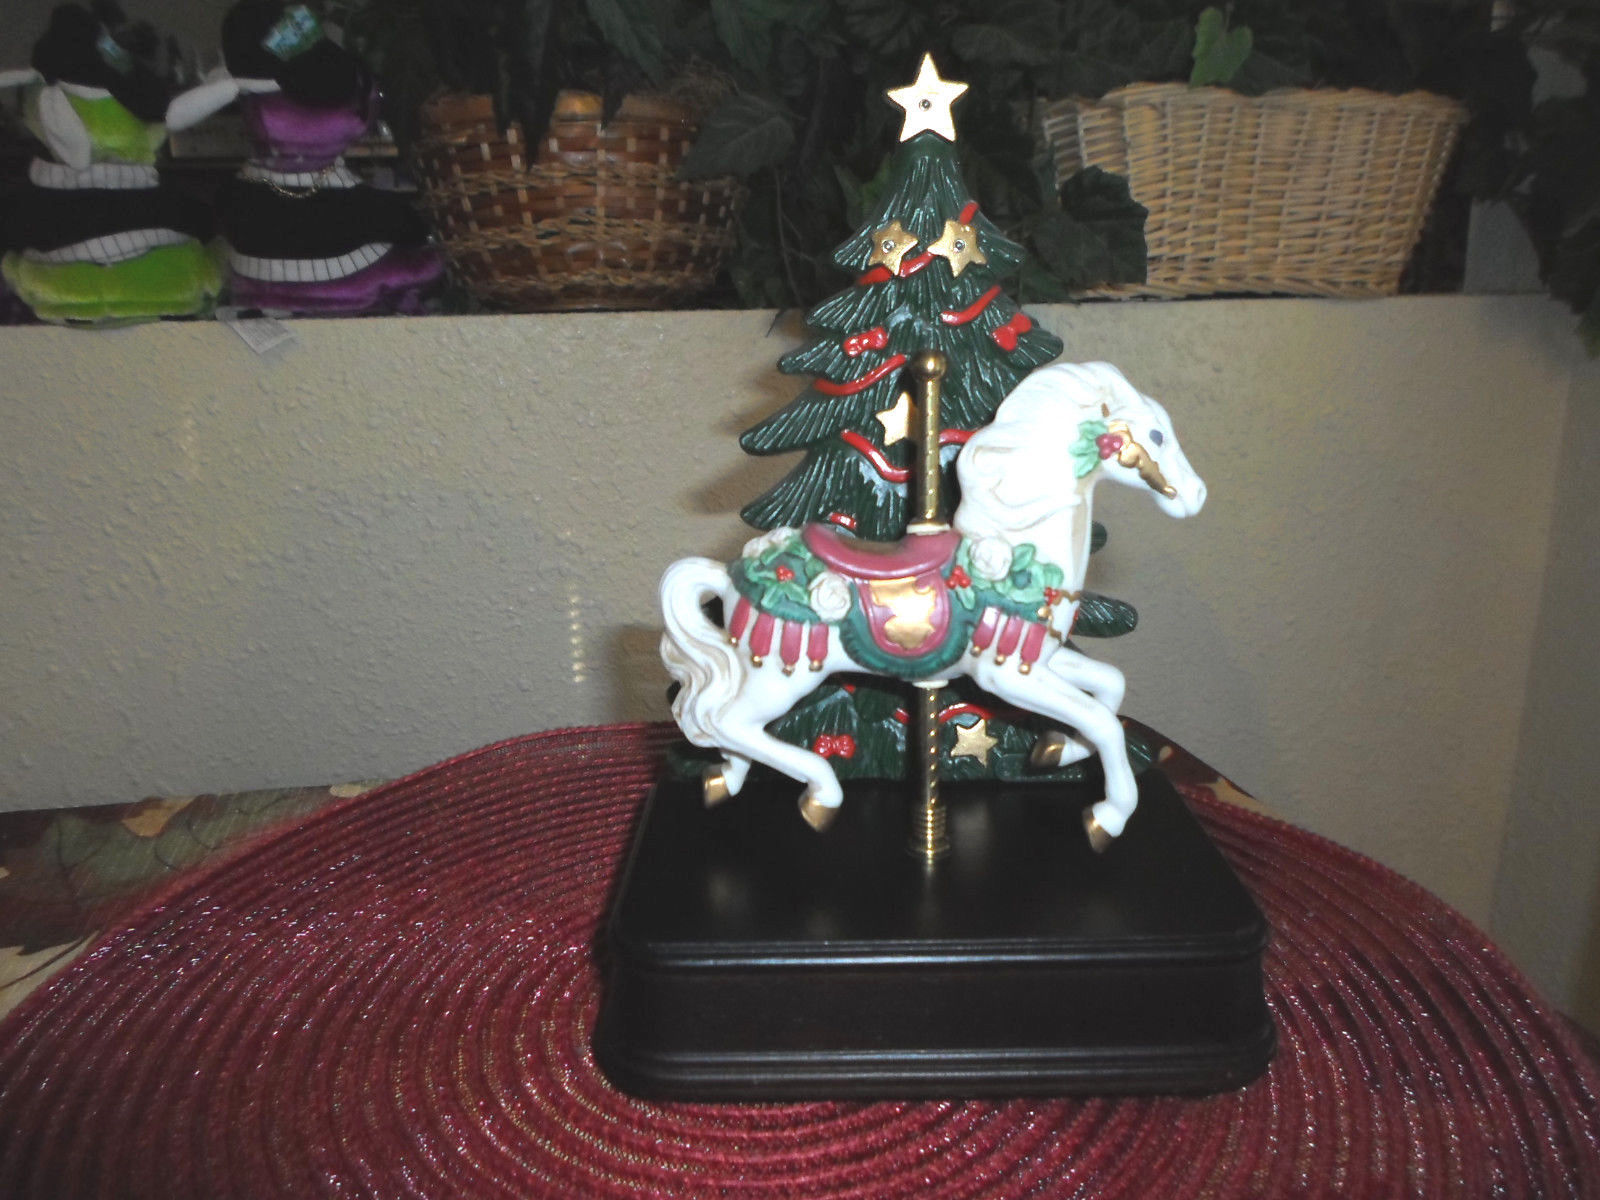 Animated Lighted Starlight Christmas Carousel Music Box - Memories from Cats - $29.99